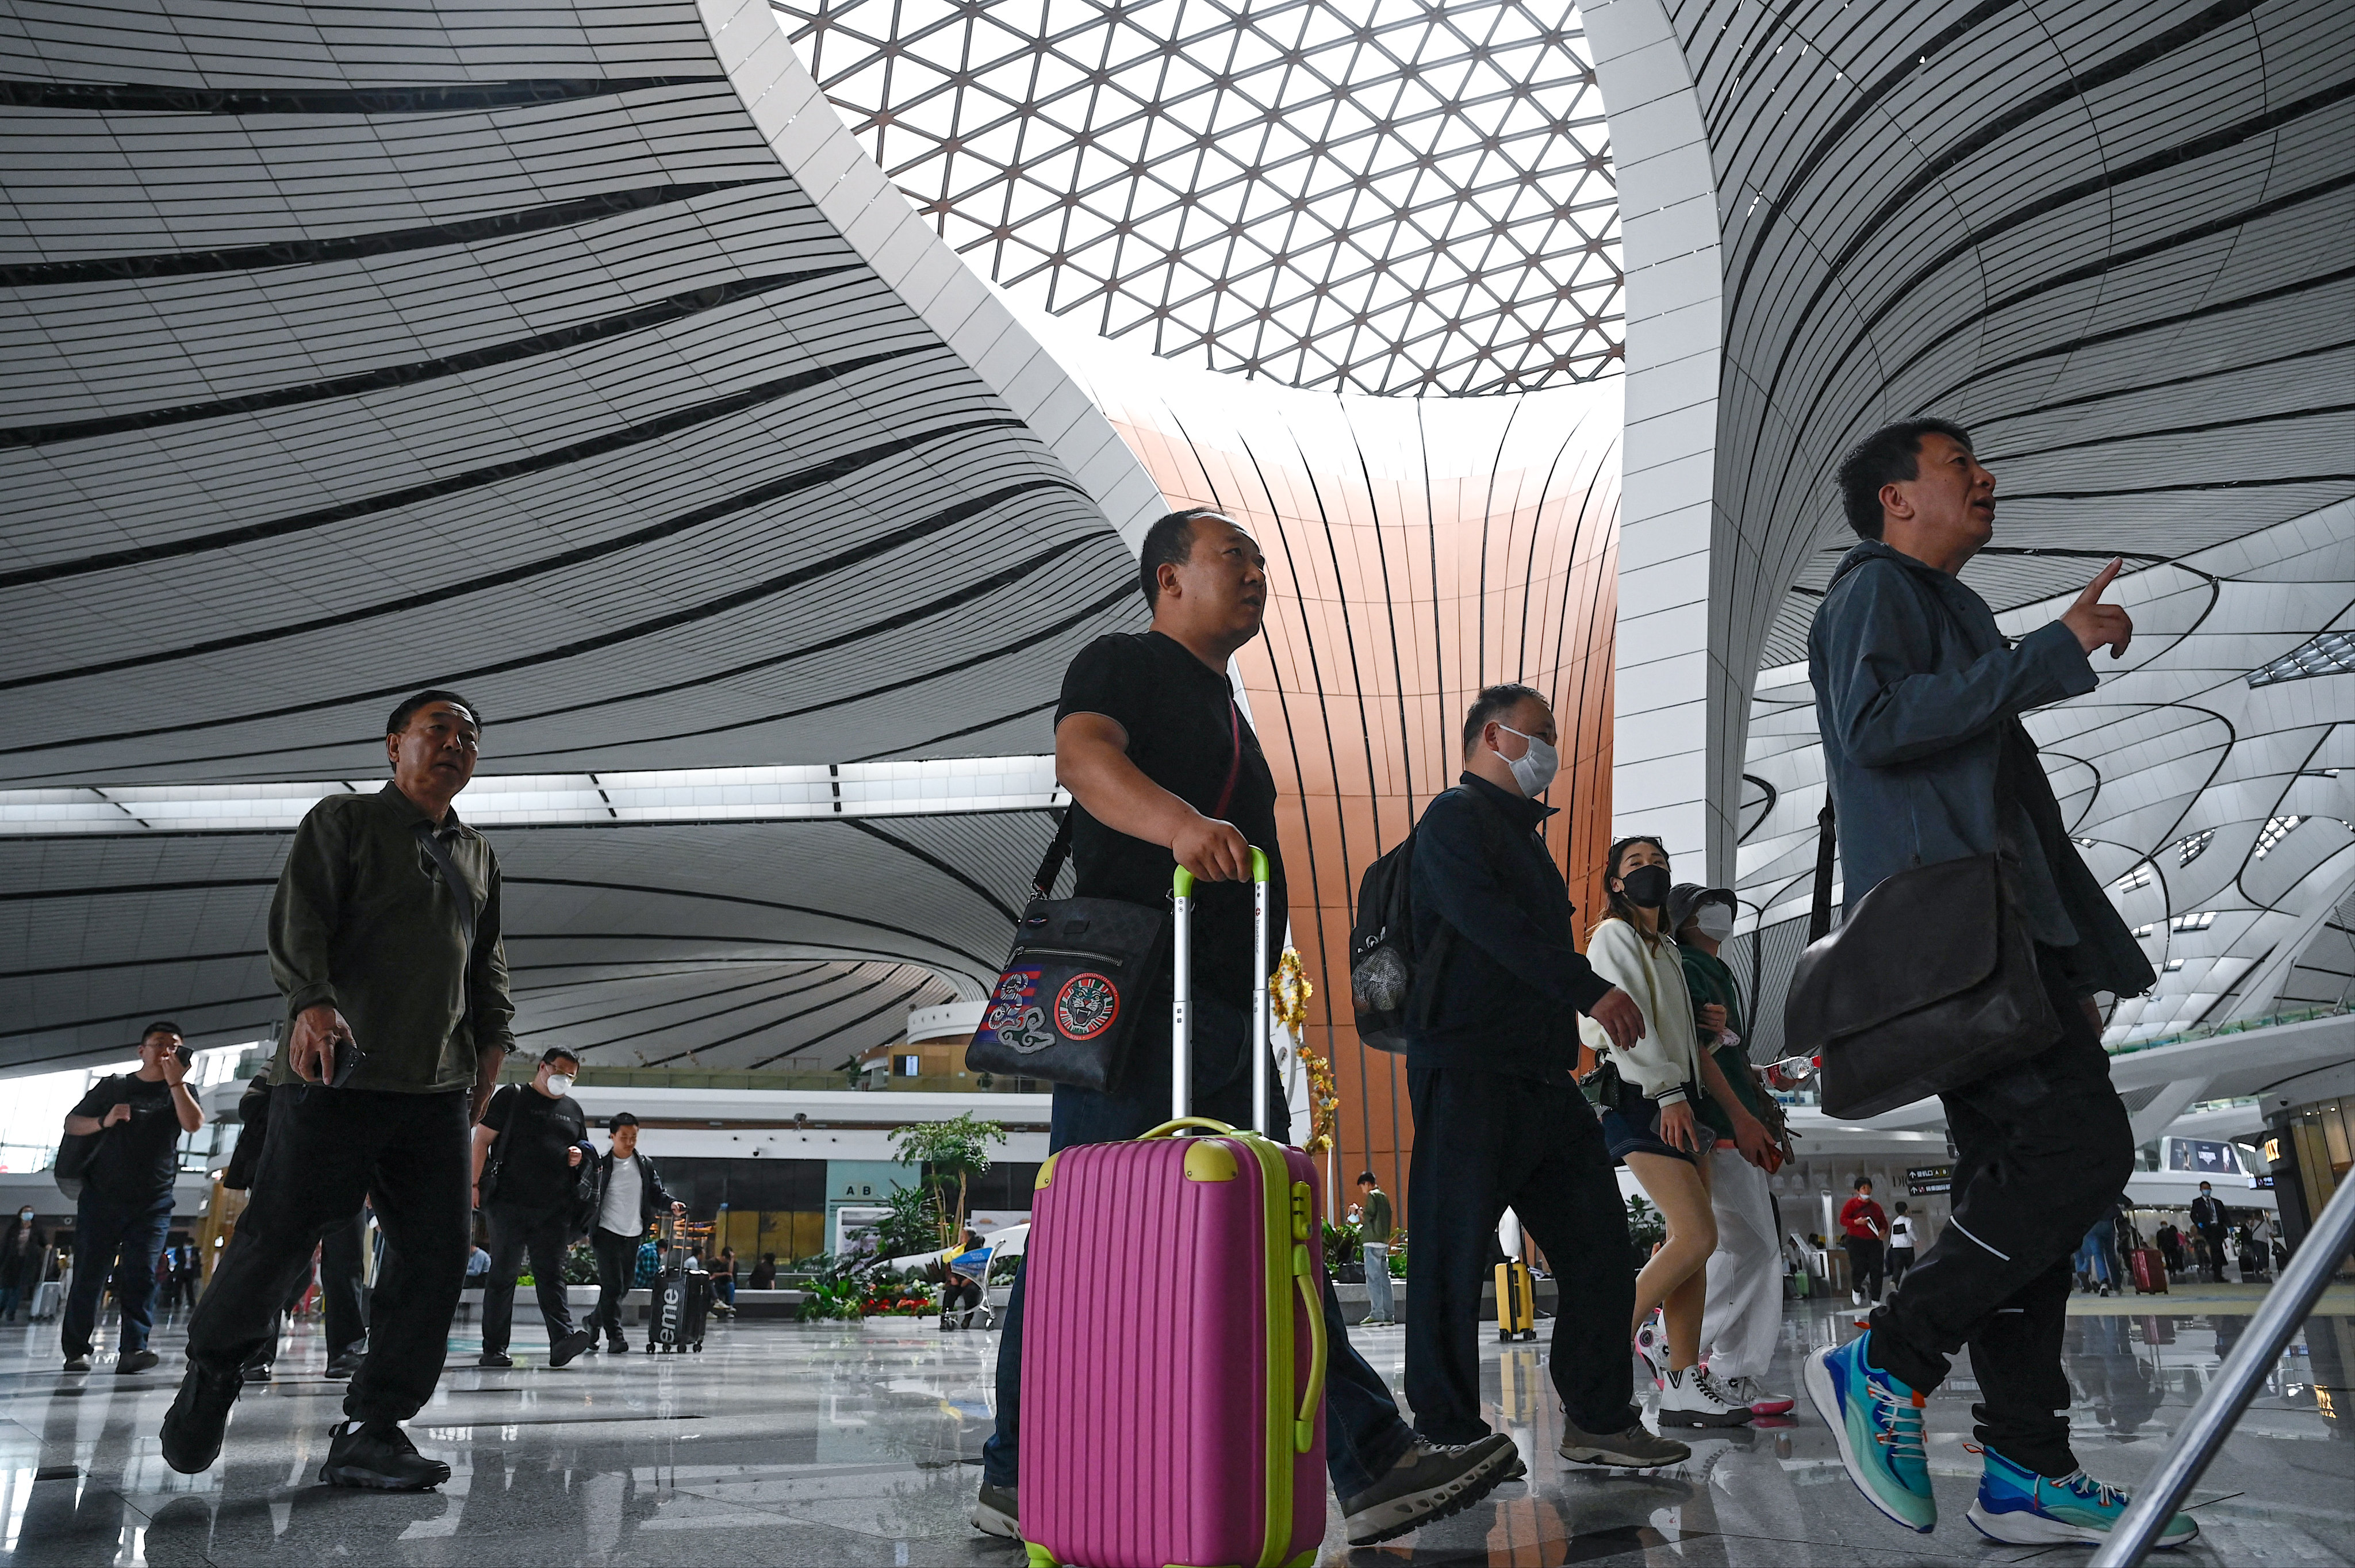 China lifted three years of strict zero-Covid controls  early last year, but the expected economic or inbound tourism revival has yet to take off. Photo: AFP